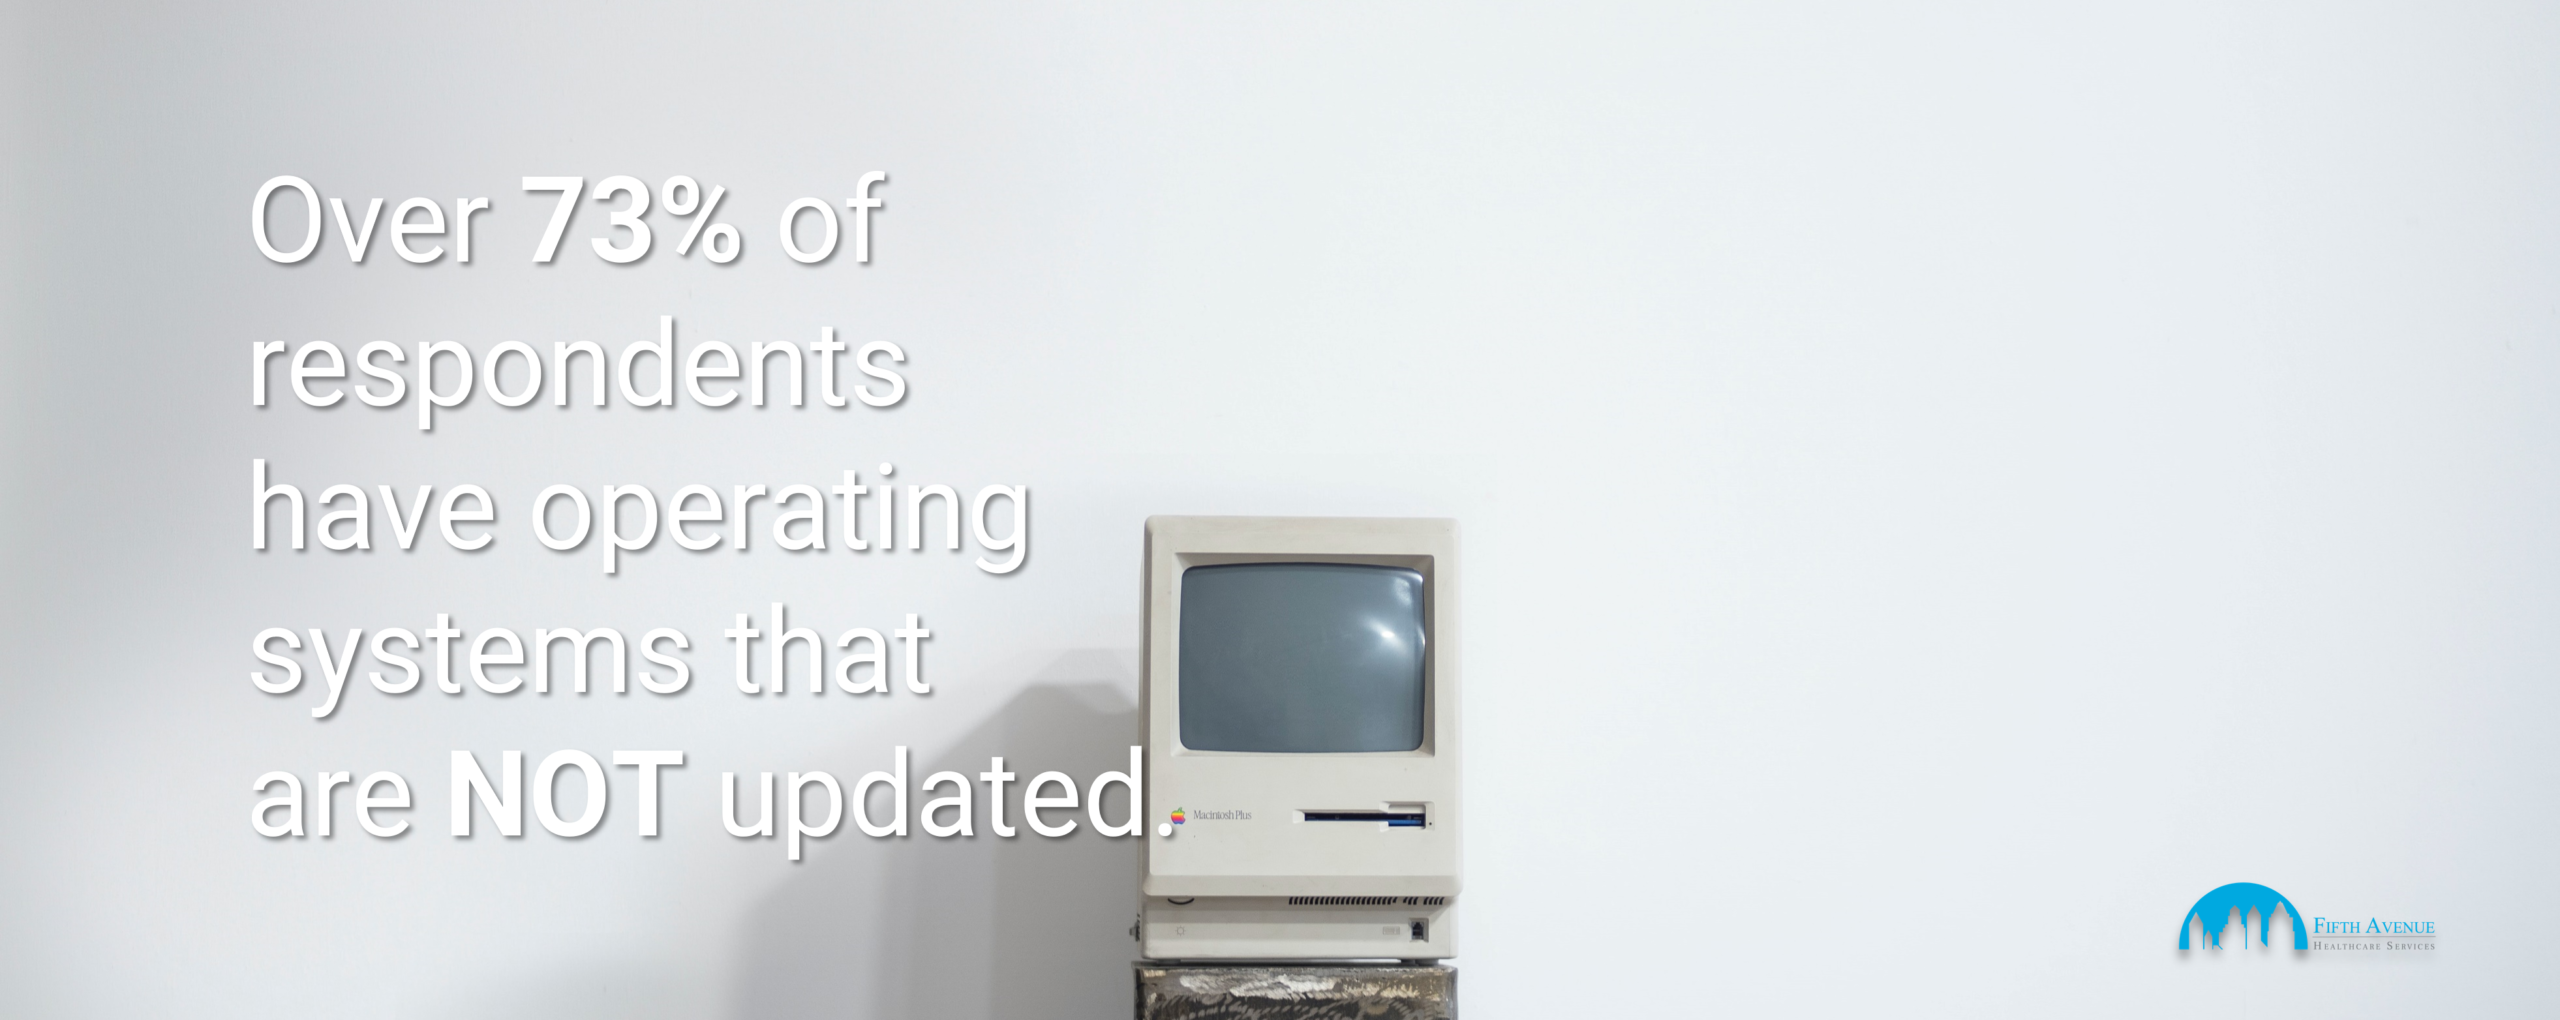 Old Operating Systems